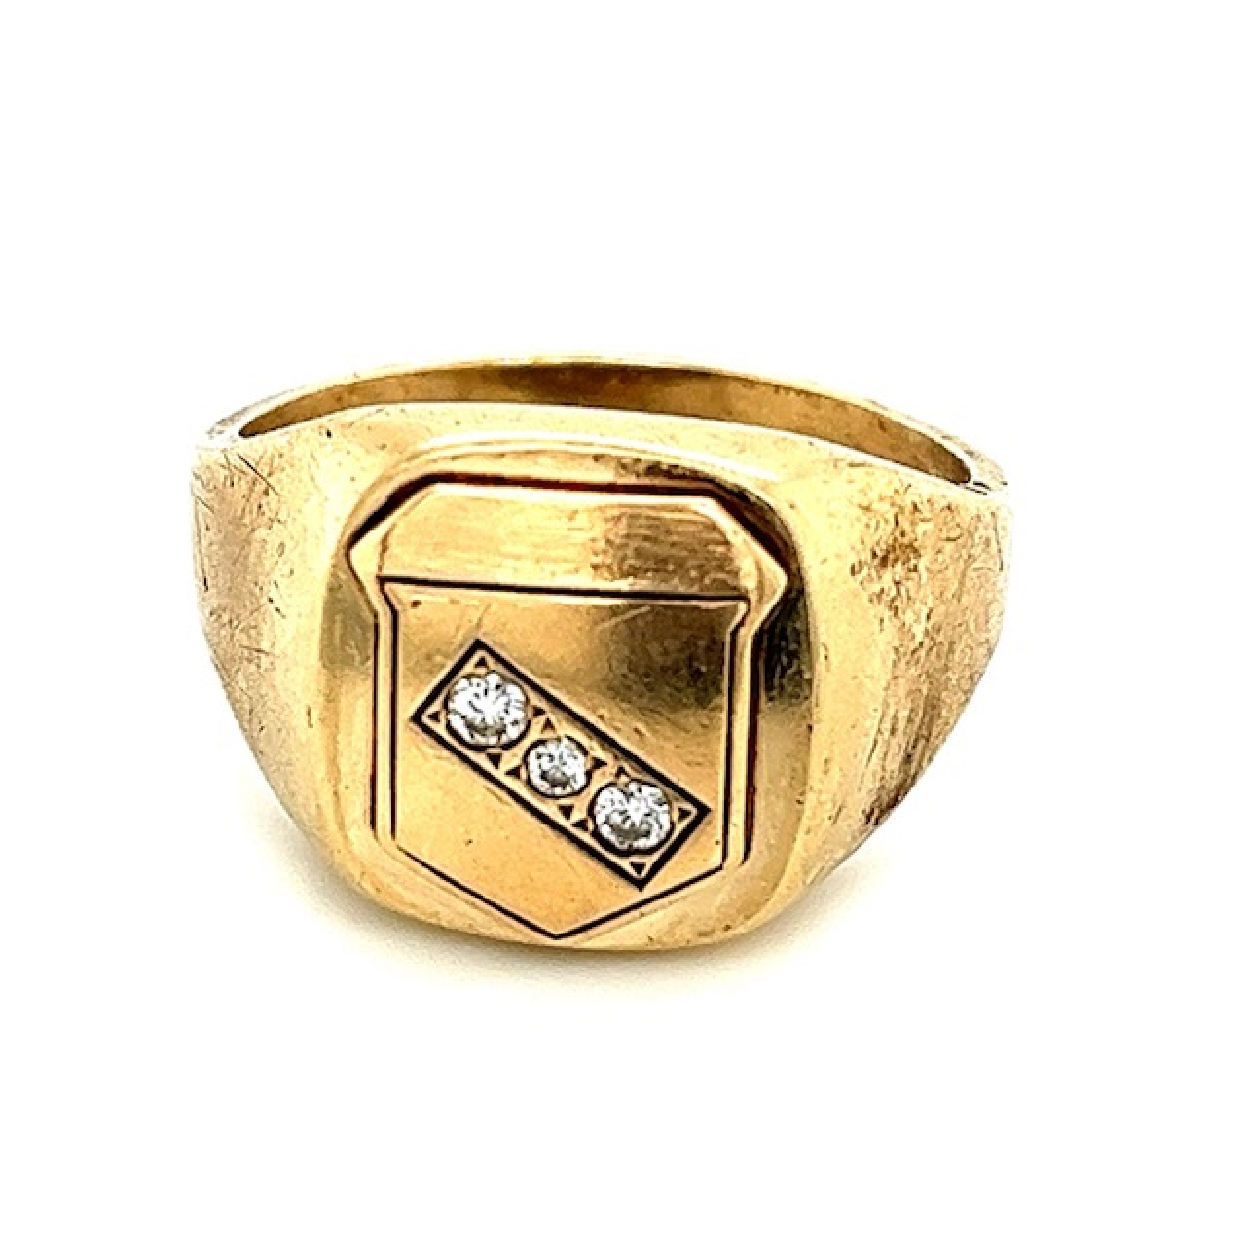 10K Yellow Gold Signet Style Ring with Three Inlayed Diamonds
Size 14 